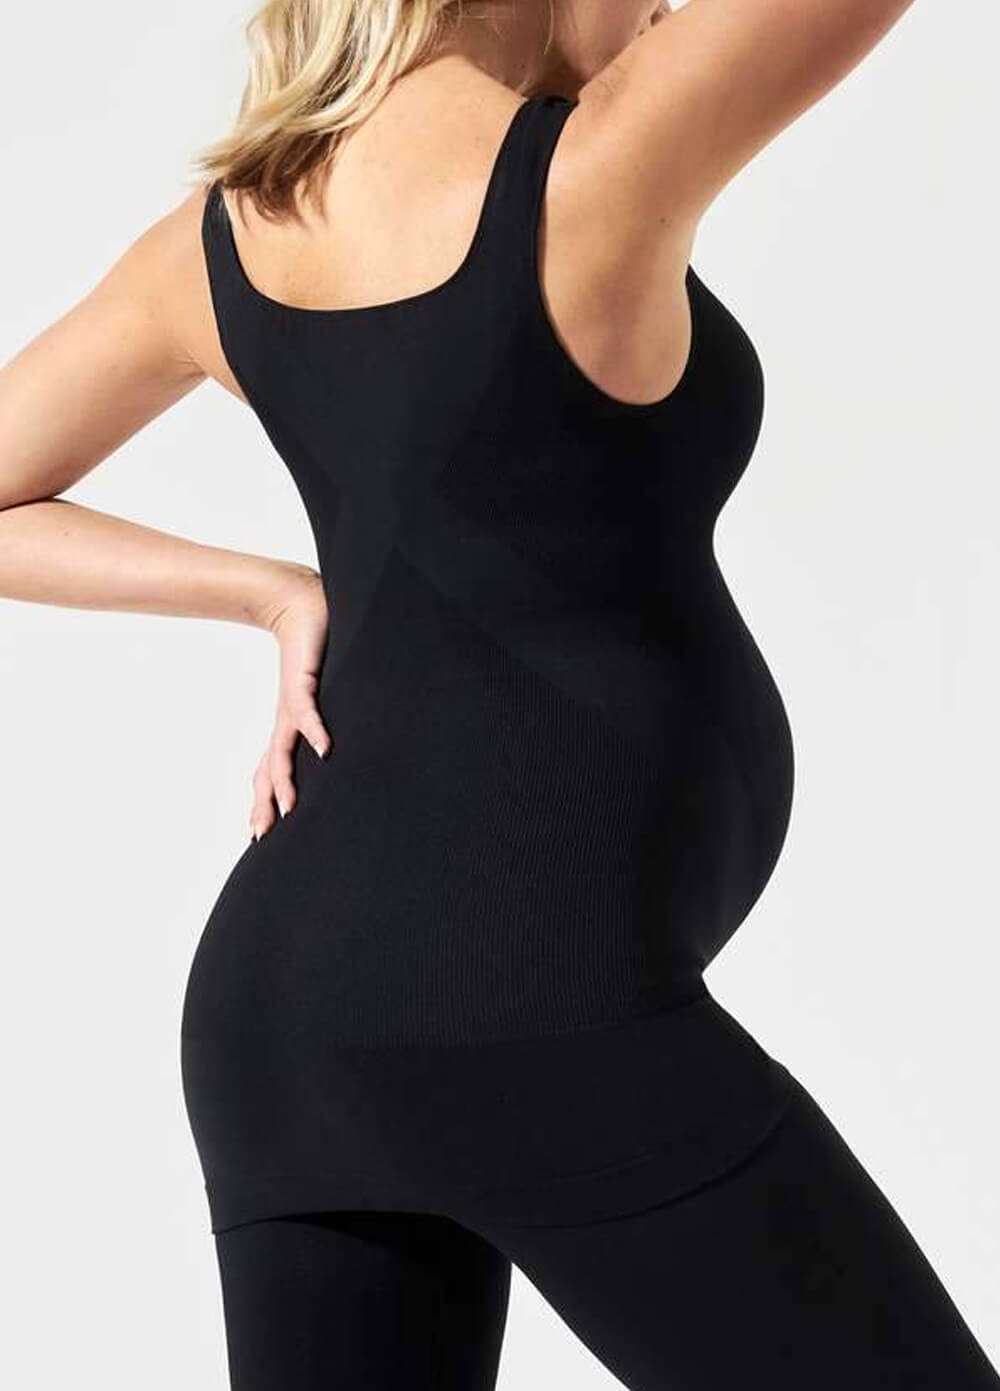 BodyStyler Maternity Belly Support Tank Top in Black by Blanqi